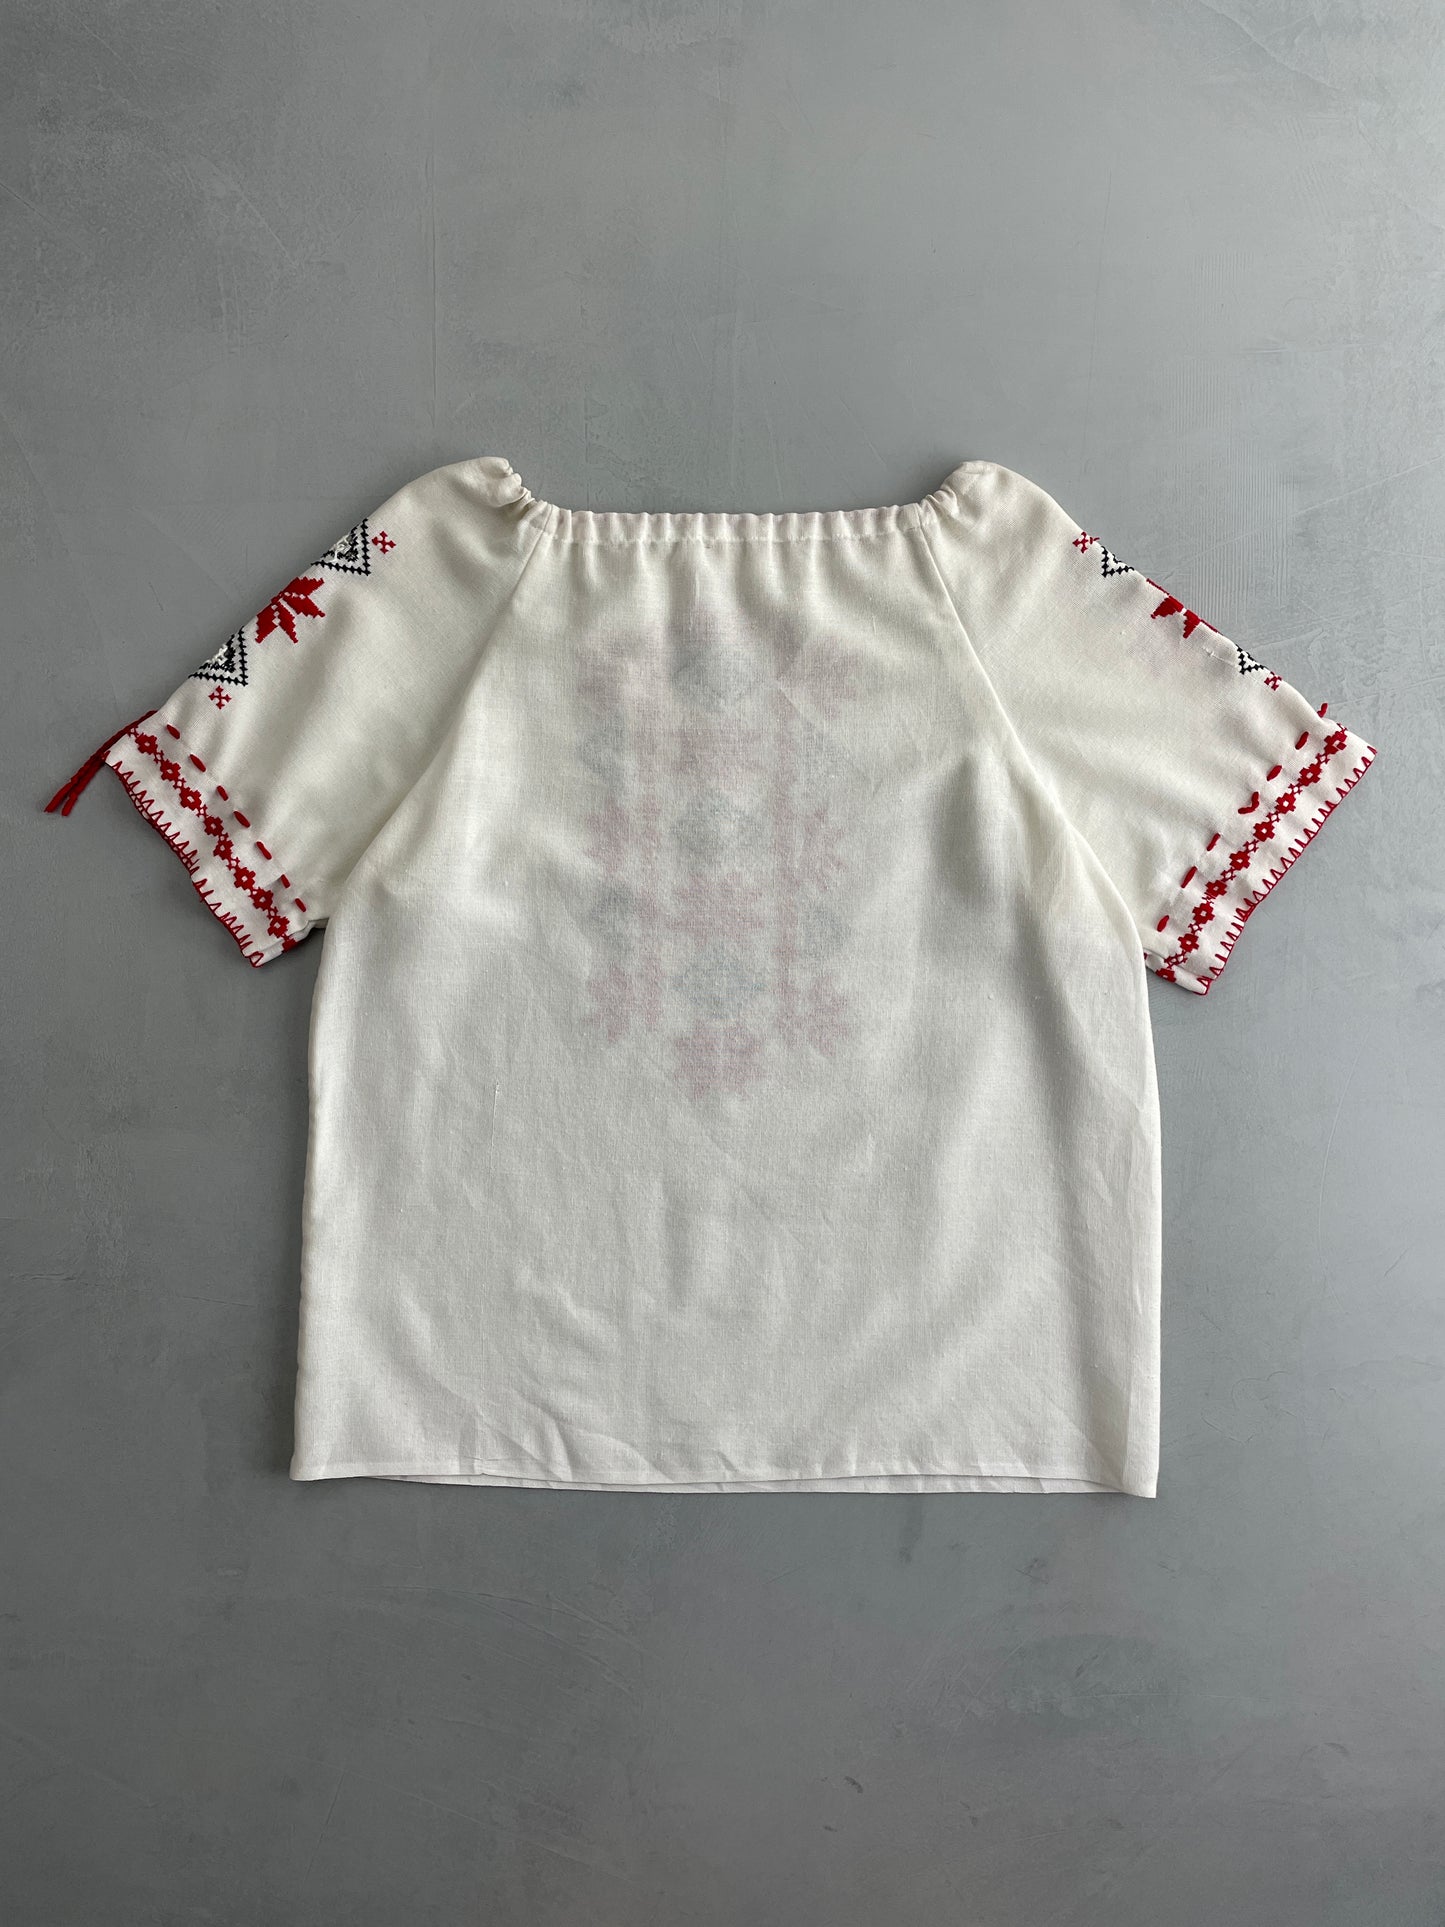 70's Embroidered Hungarian Blouse [W8-10]